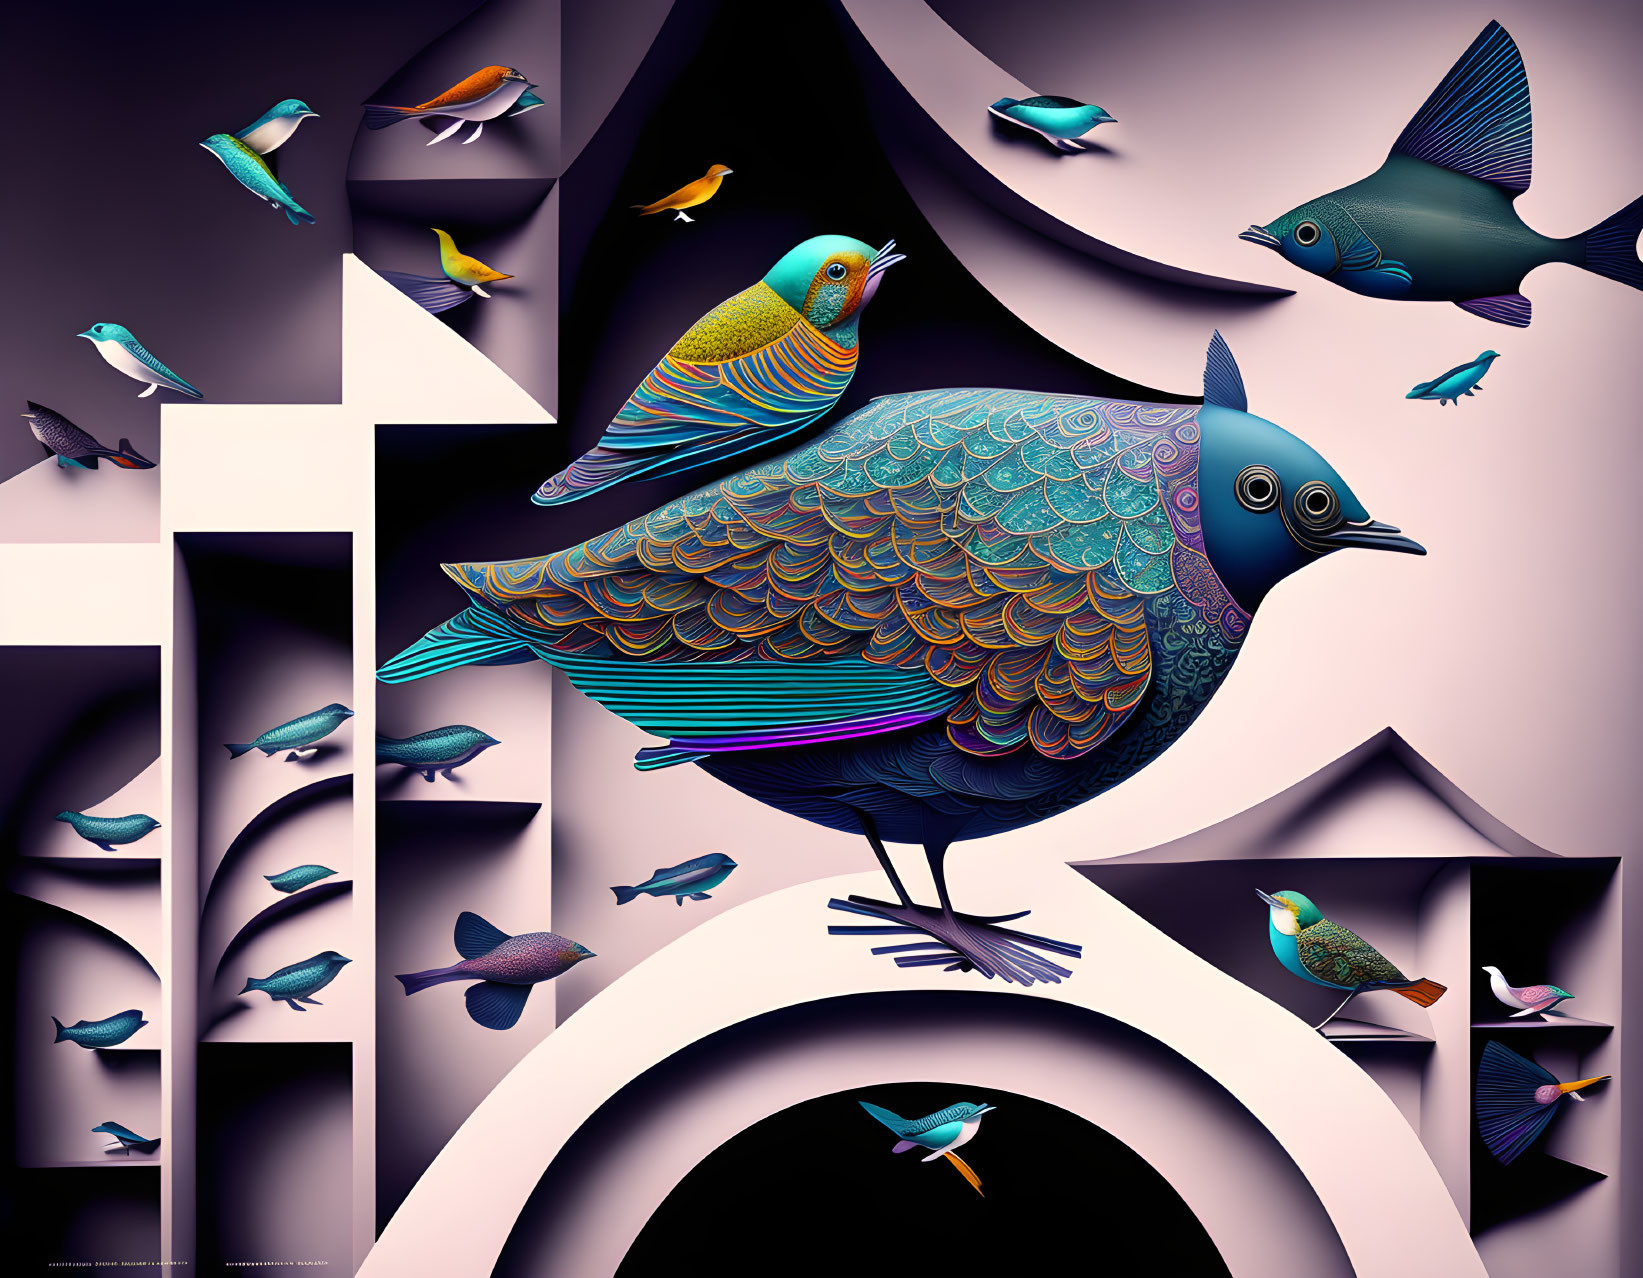 Abstract digital artwork with stylized birds in various sizes against geometric background.